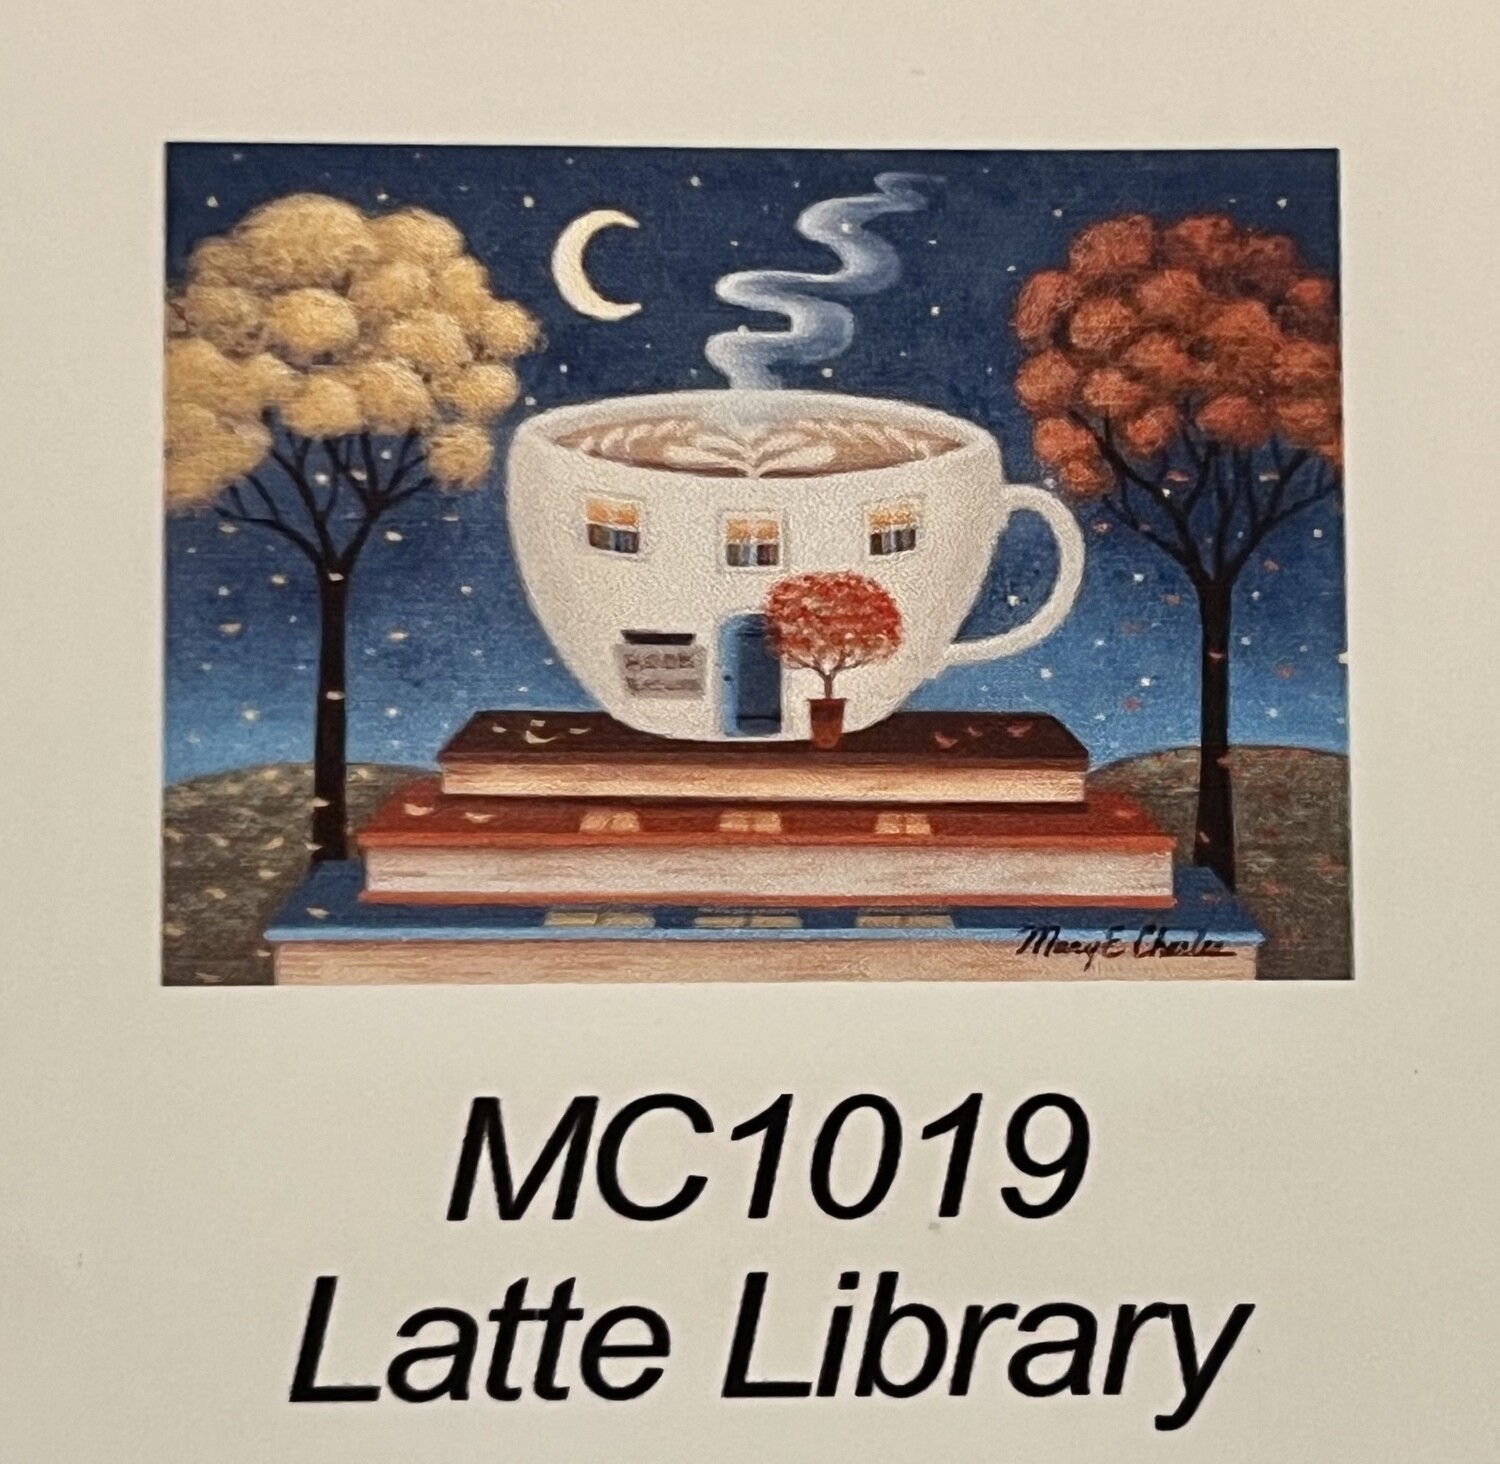 Latte Library Card